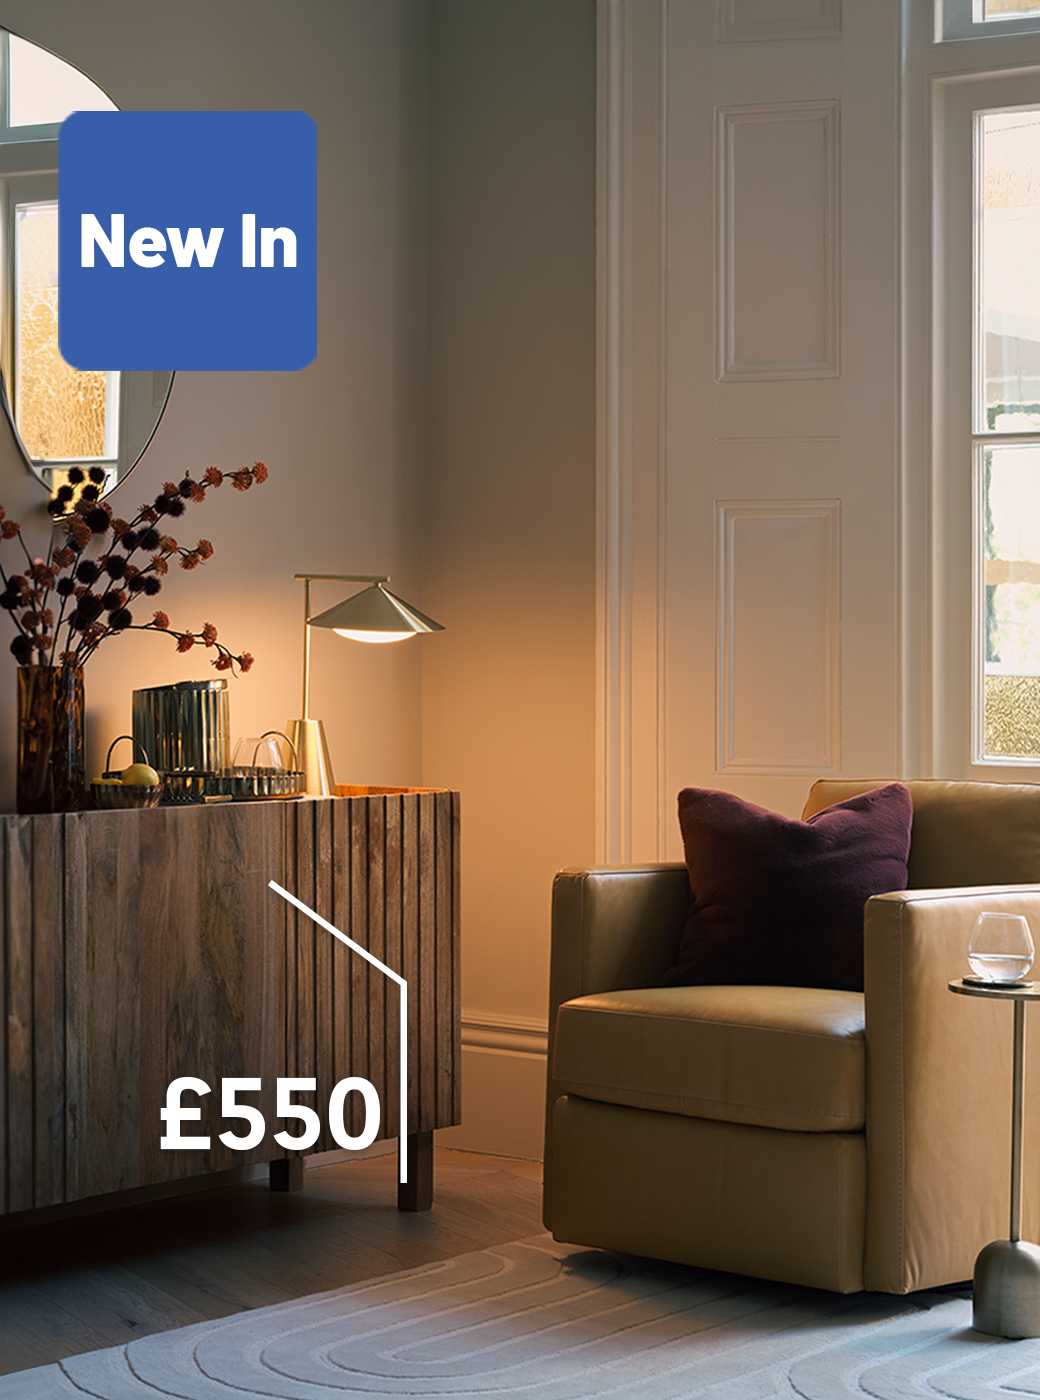 Explore our brand new home and furniture range.